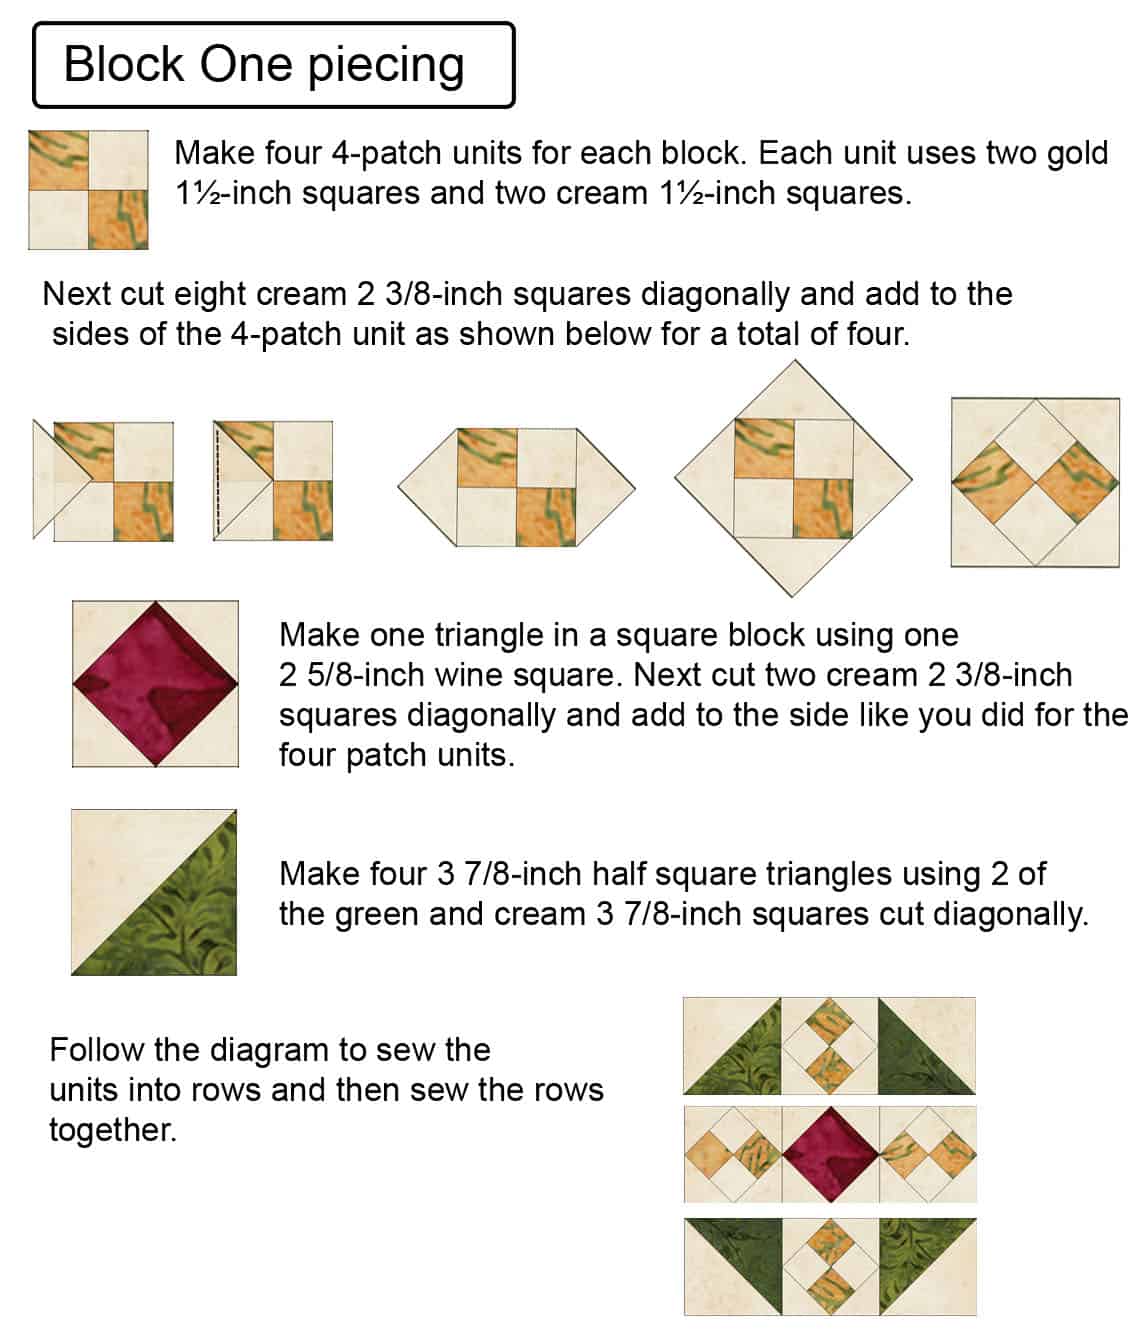 Piecing guide for blocks